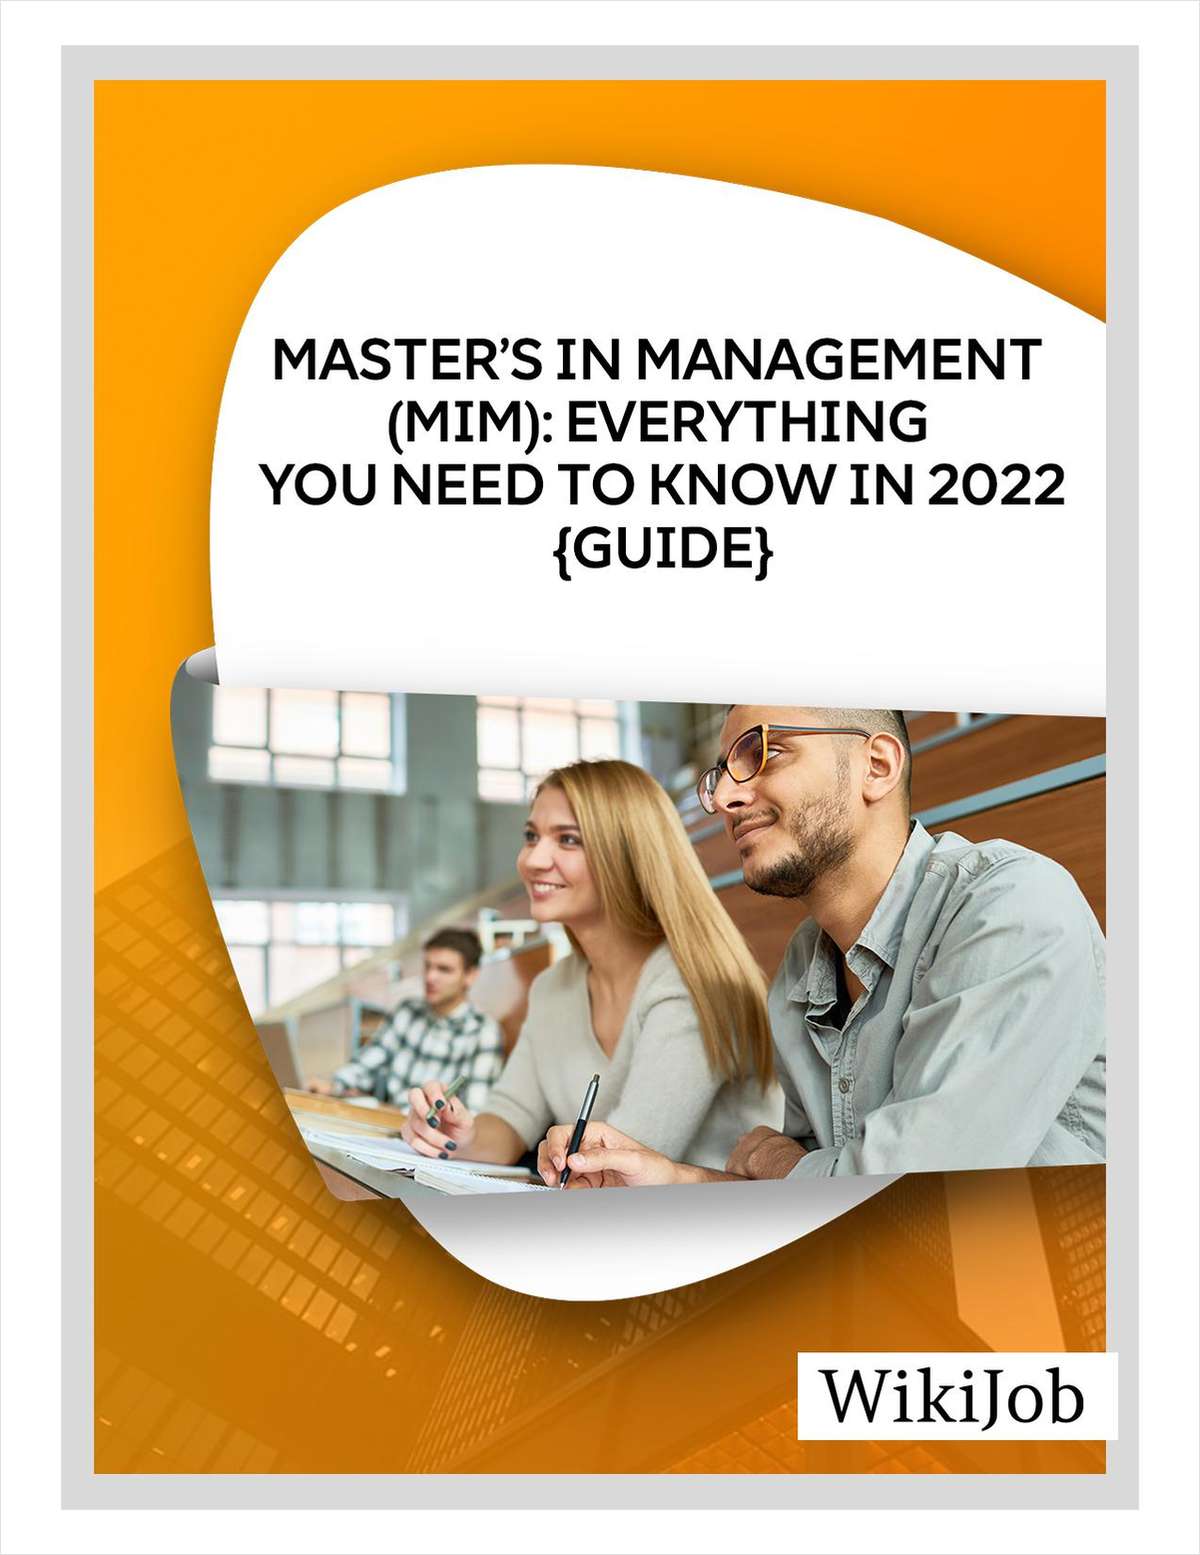 Master's in Management (MiM): Everything You Need To Know in 2022